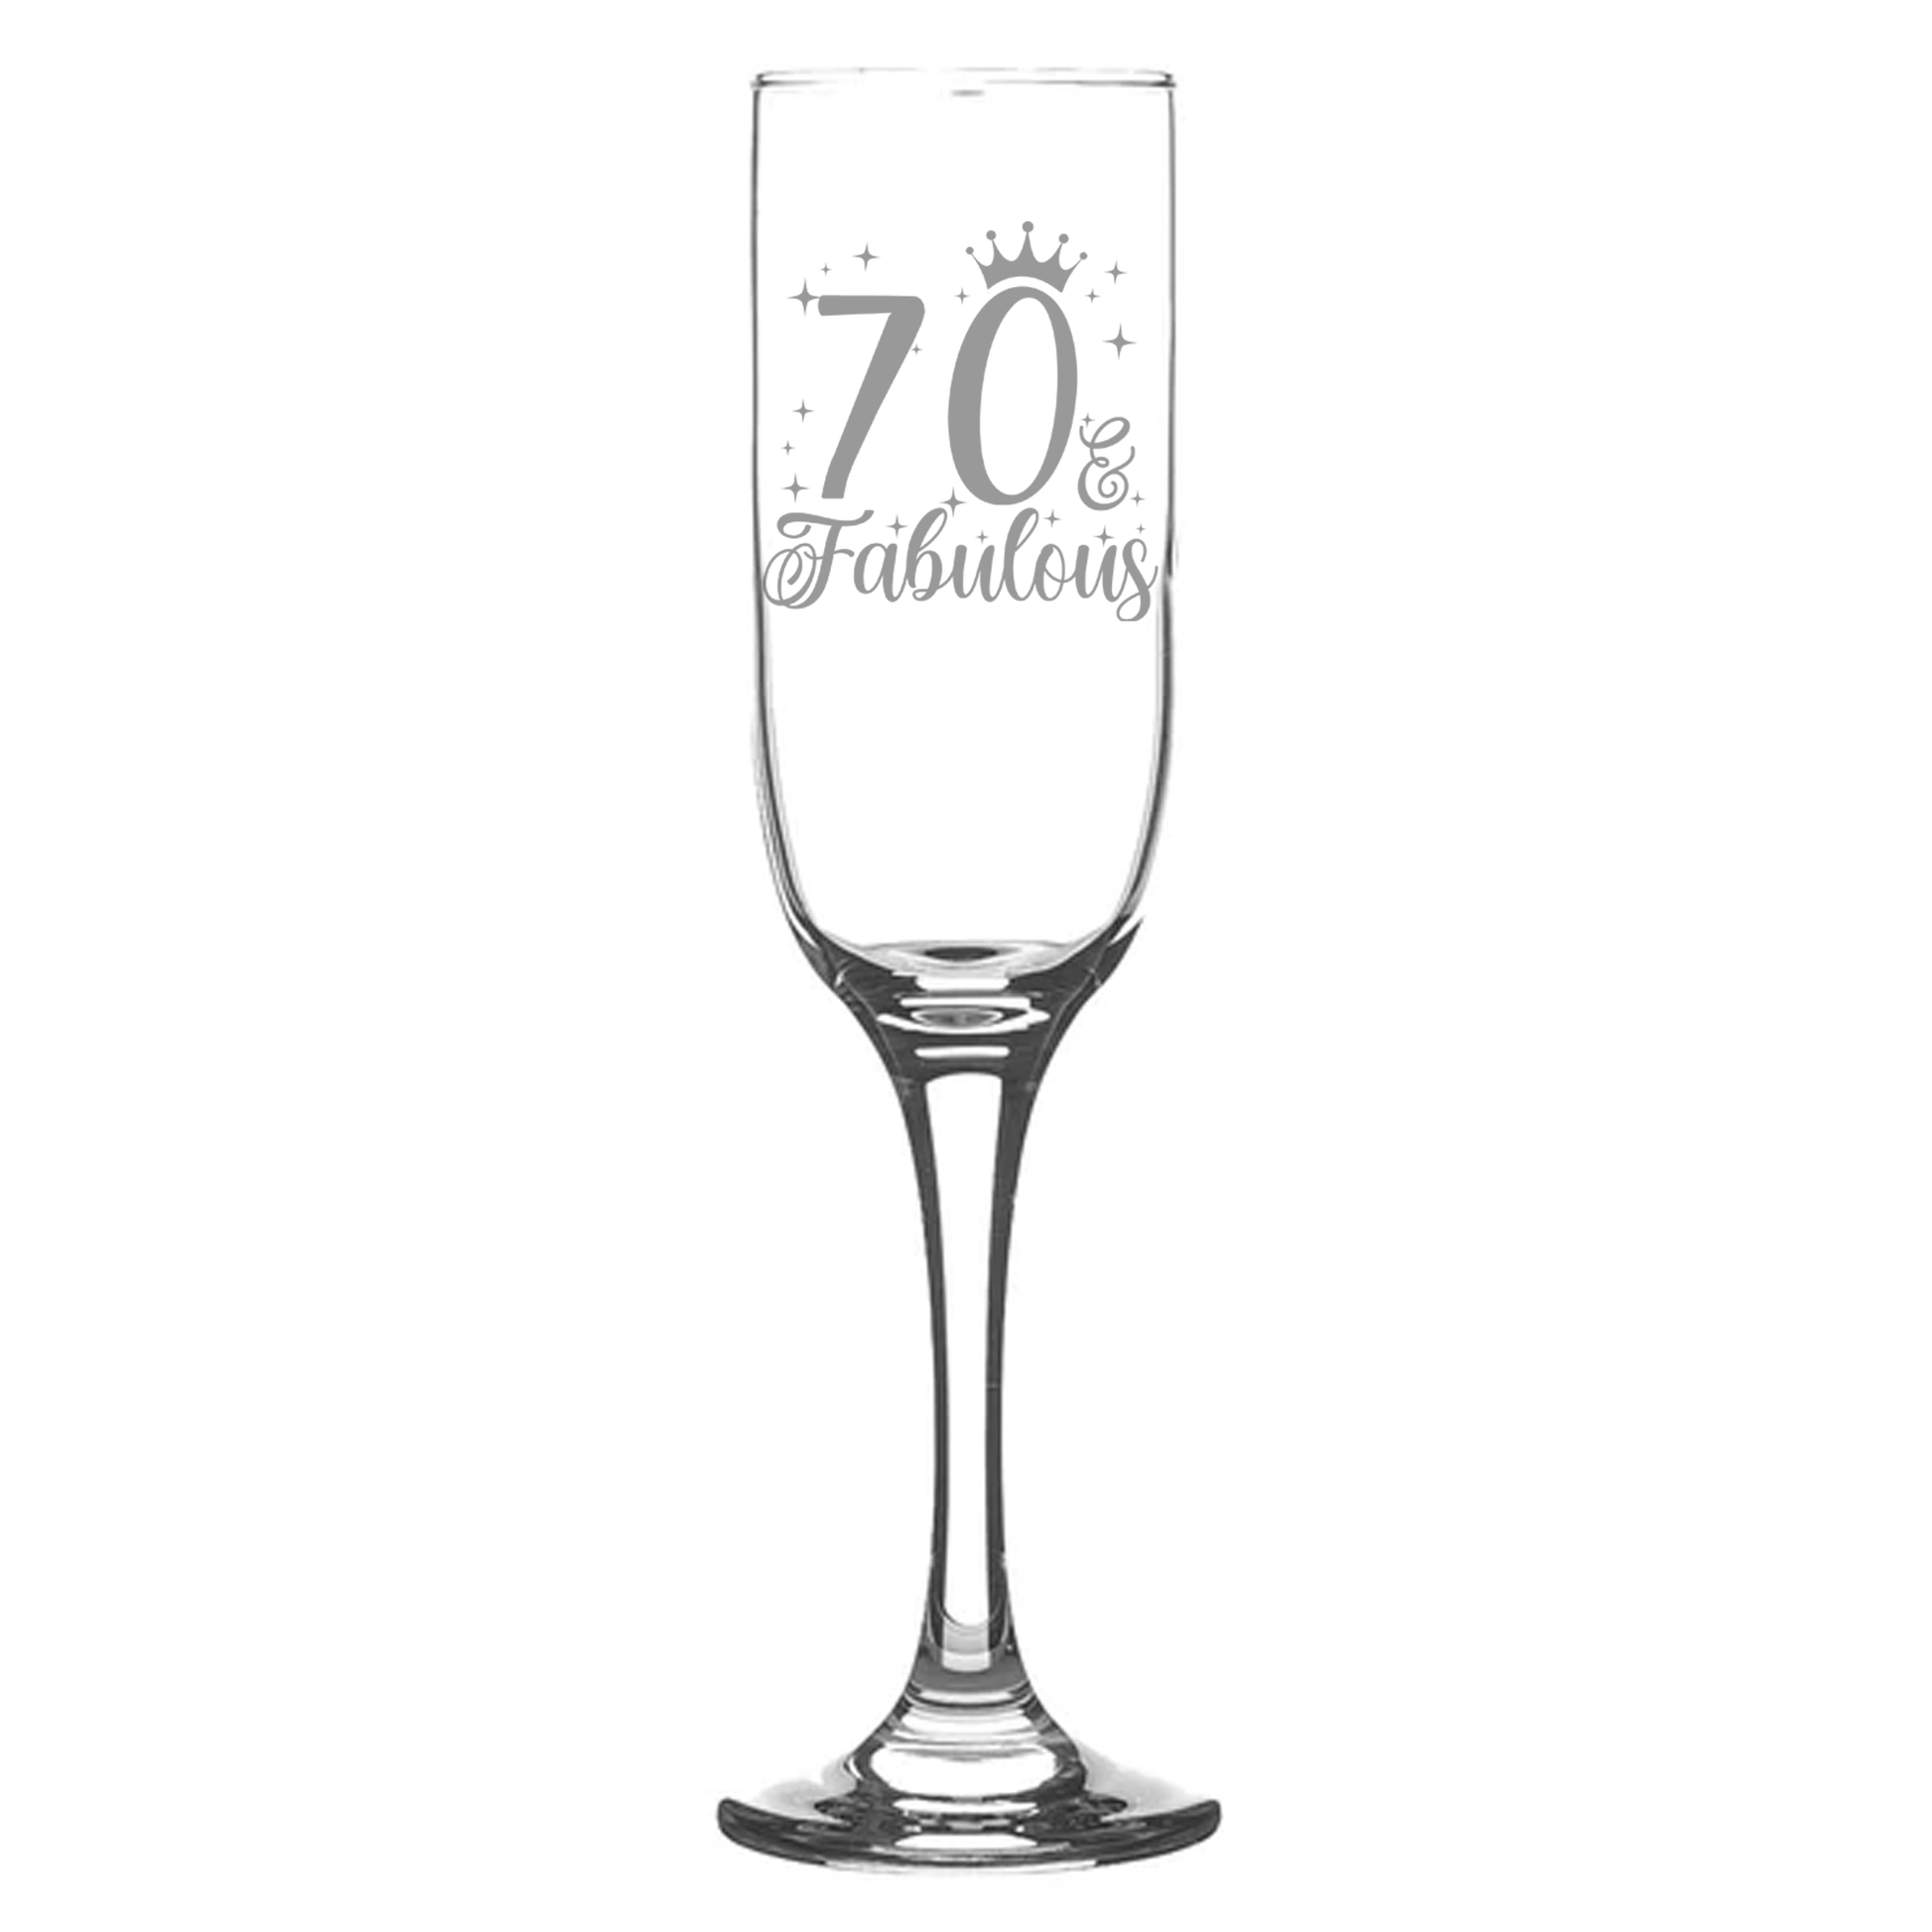 70 & Fabulous Engraved Champagne Glass and/or Coaster Set  - Always Looking Good - Champagne Glass On Its Own  